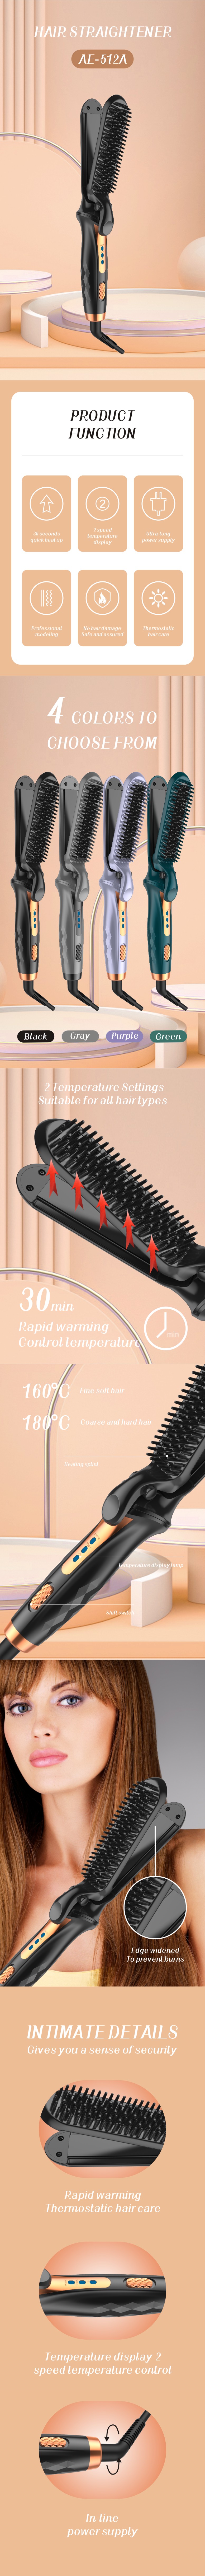 Hot Sale 2 in 1 Curling Straightening Wand with comb professional PTC Heating Wave Hair Clurer Straightener Curling Iron AE-512